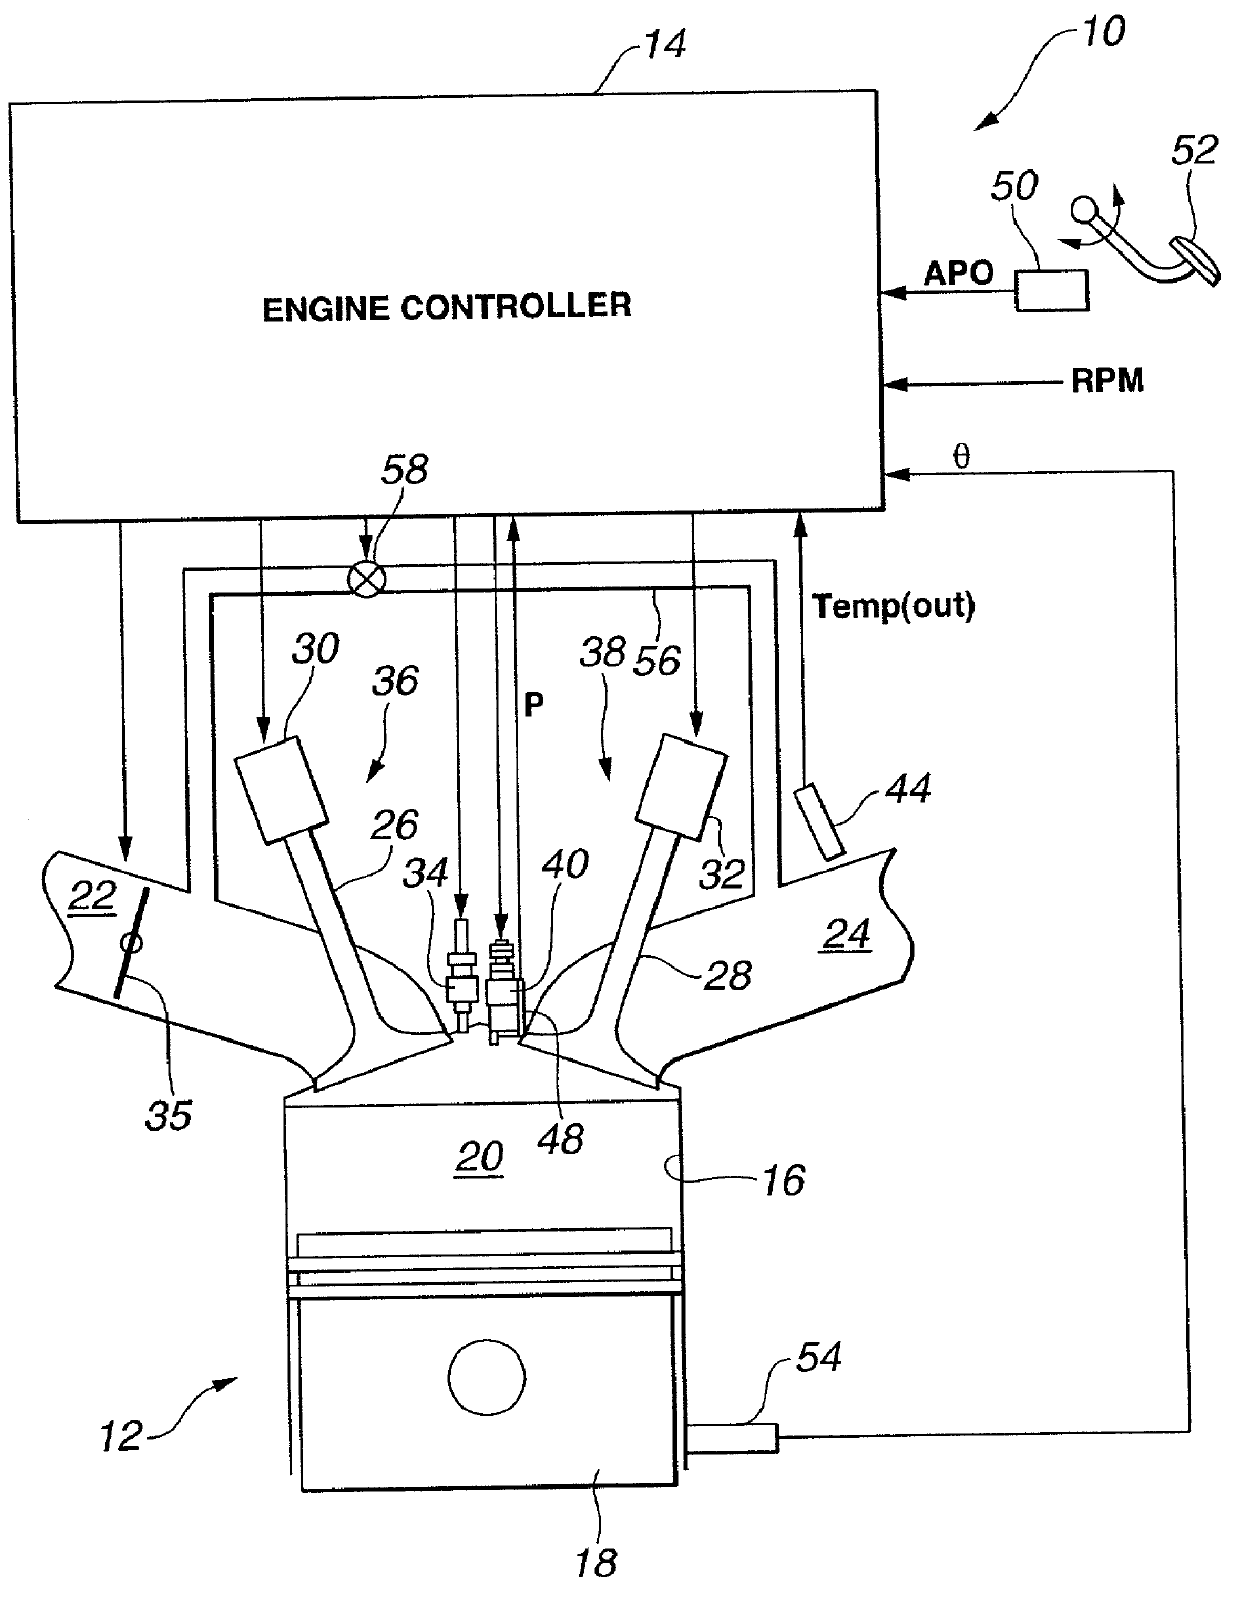 Enhanced multiple injection for auto-ignition in internal combustion engines